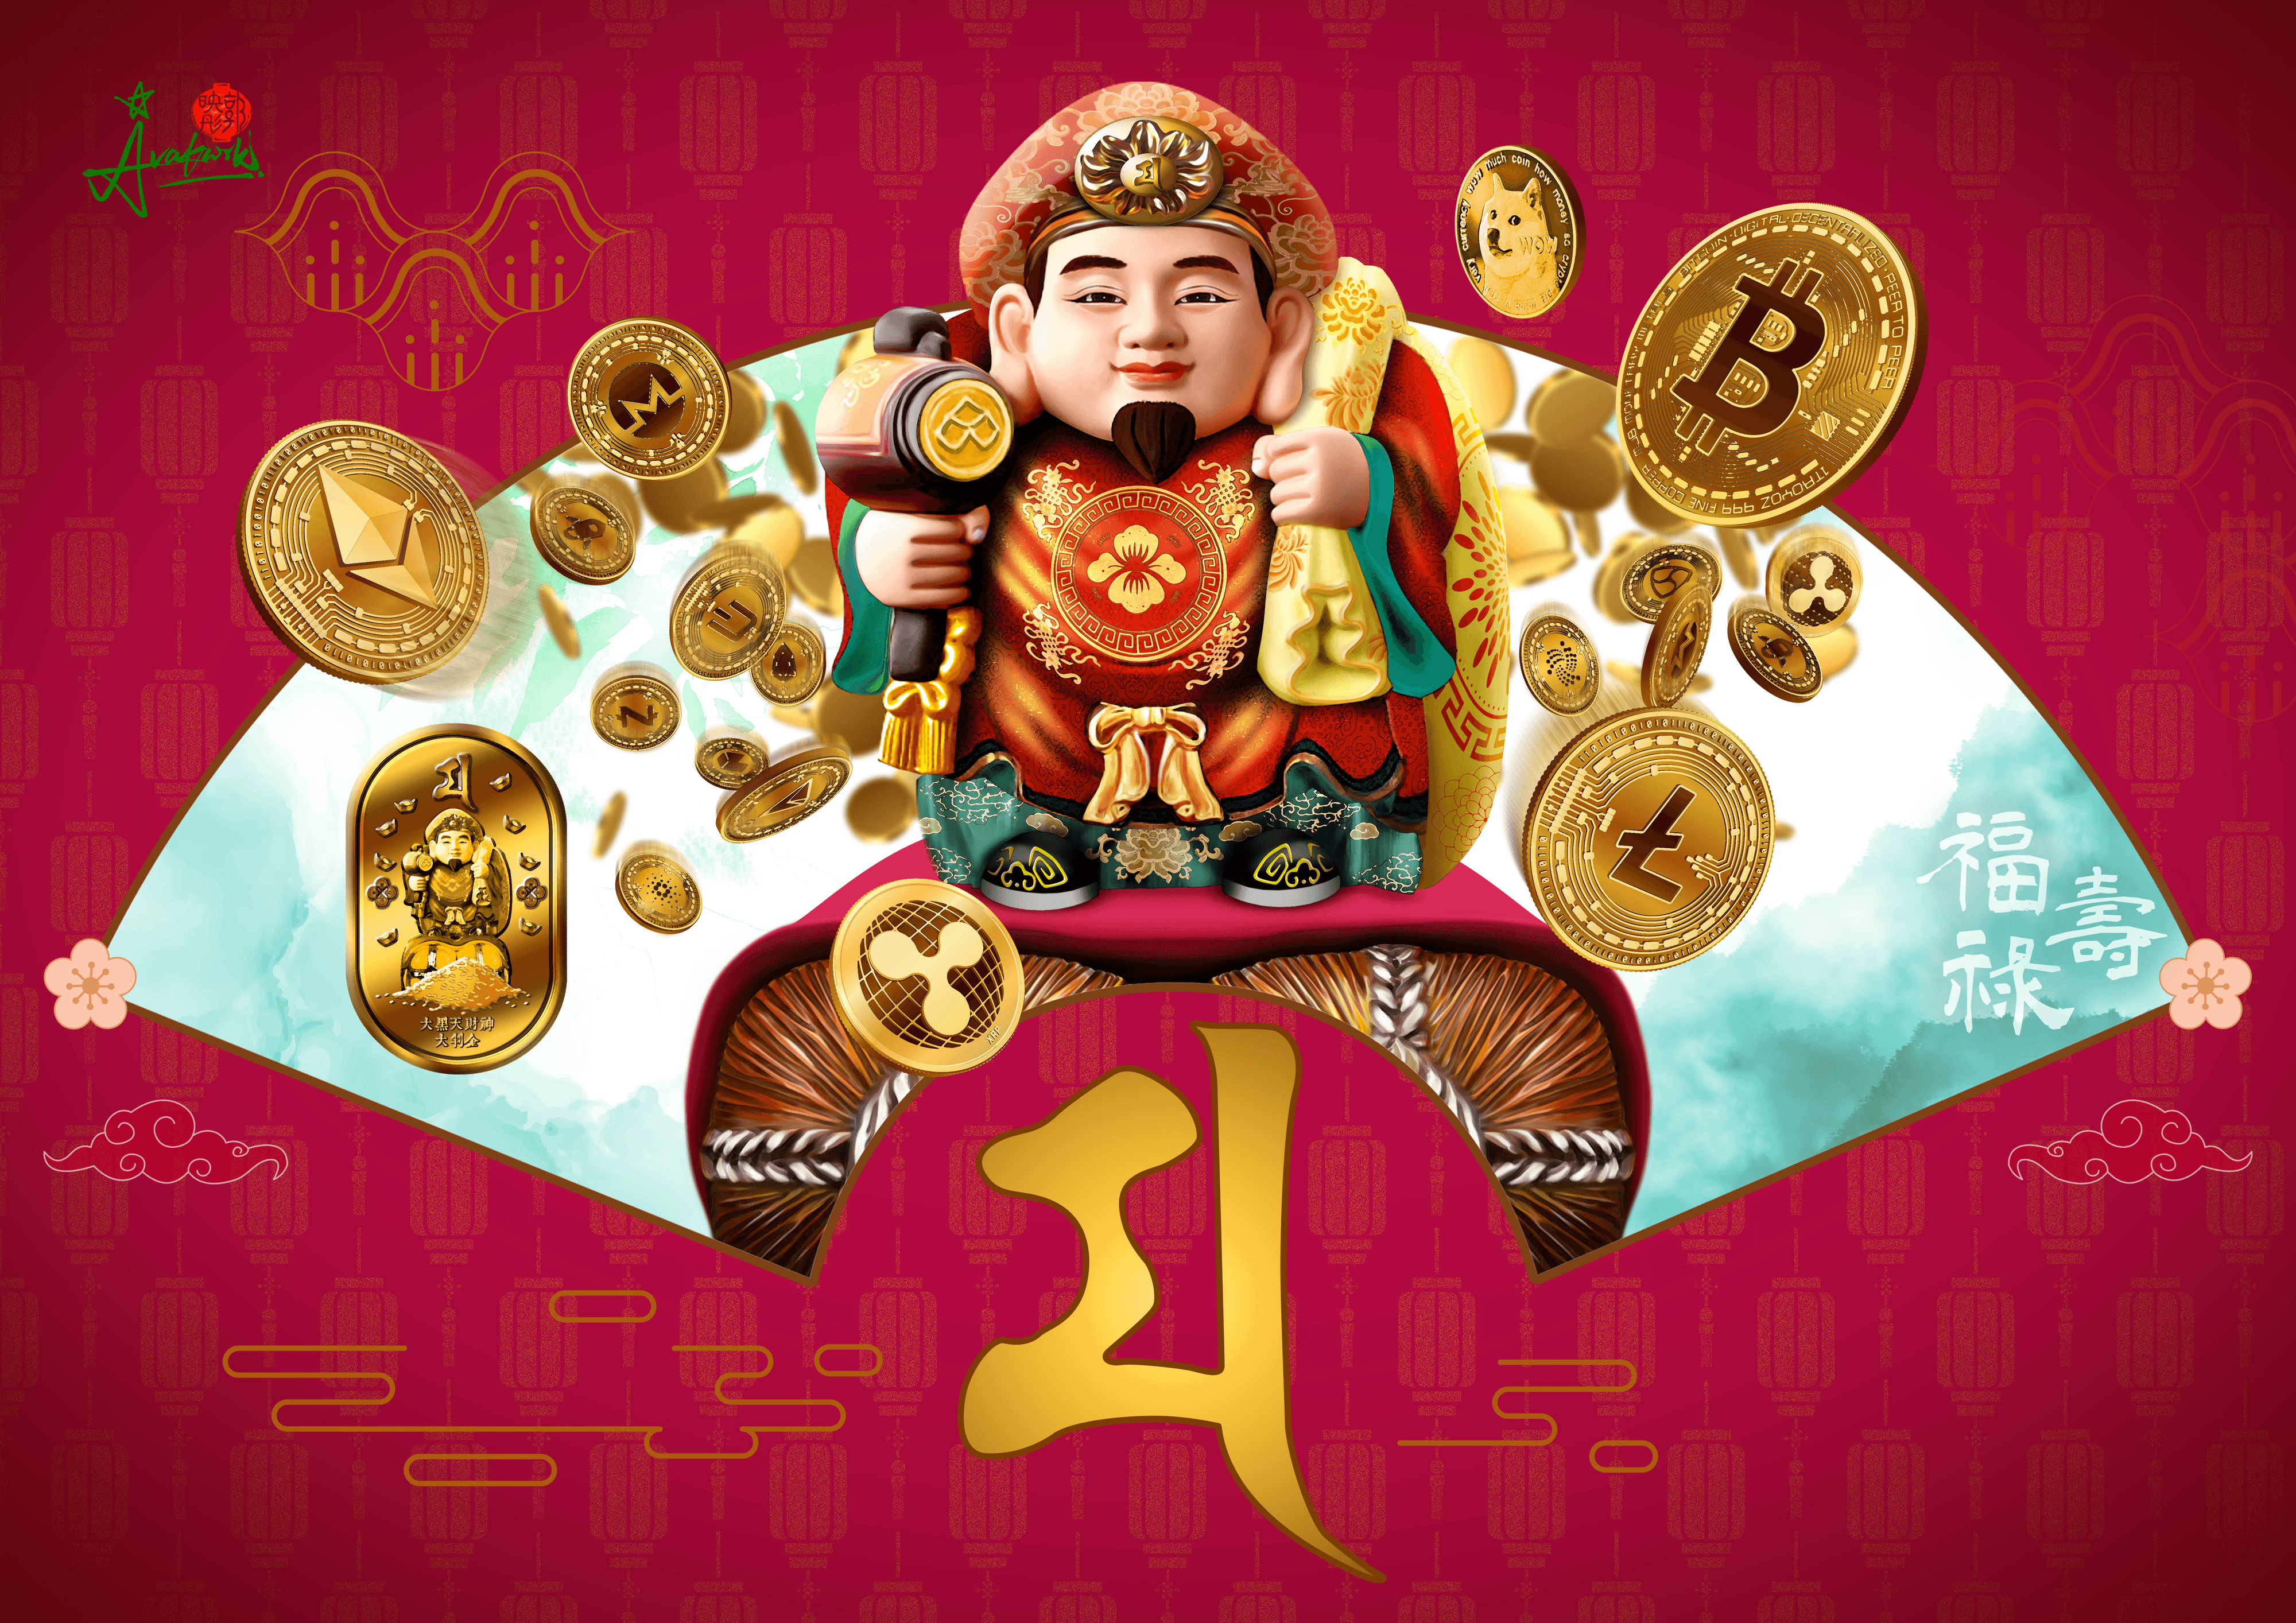 Chinese Fan Painting – Daikokuten, the God of Fortune Wealth Prosperity is sending virtual currencies